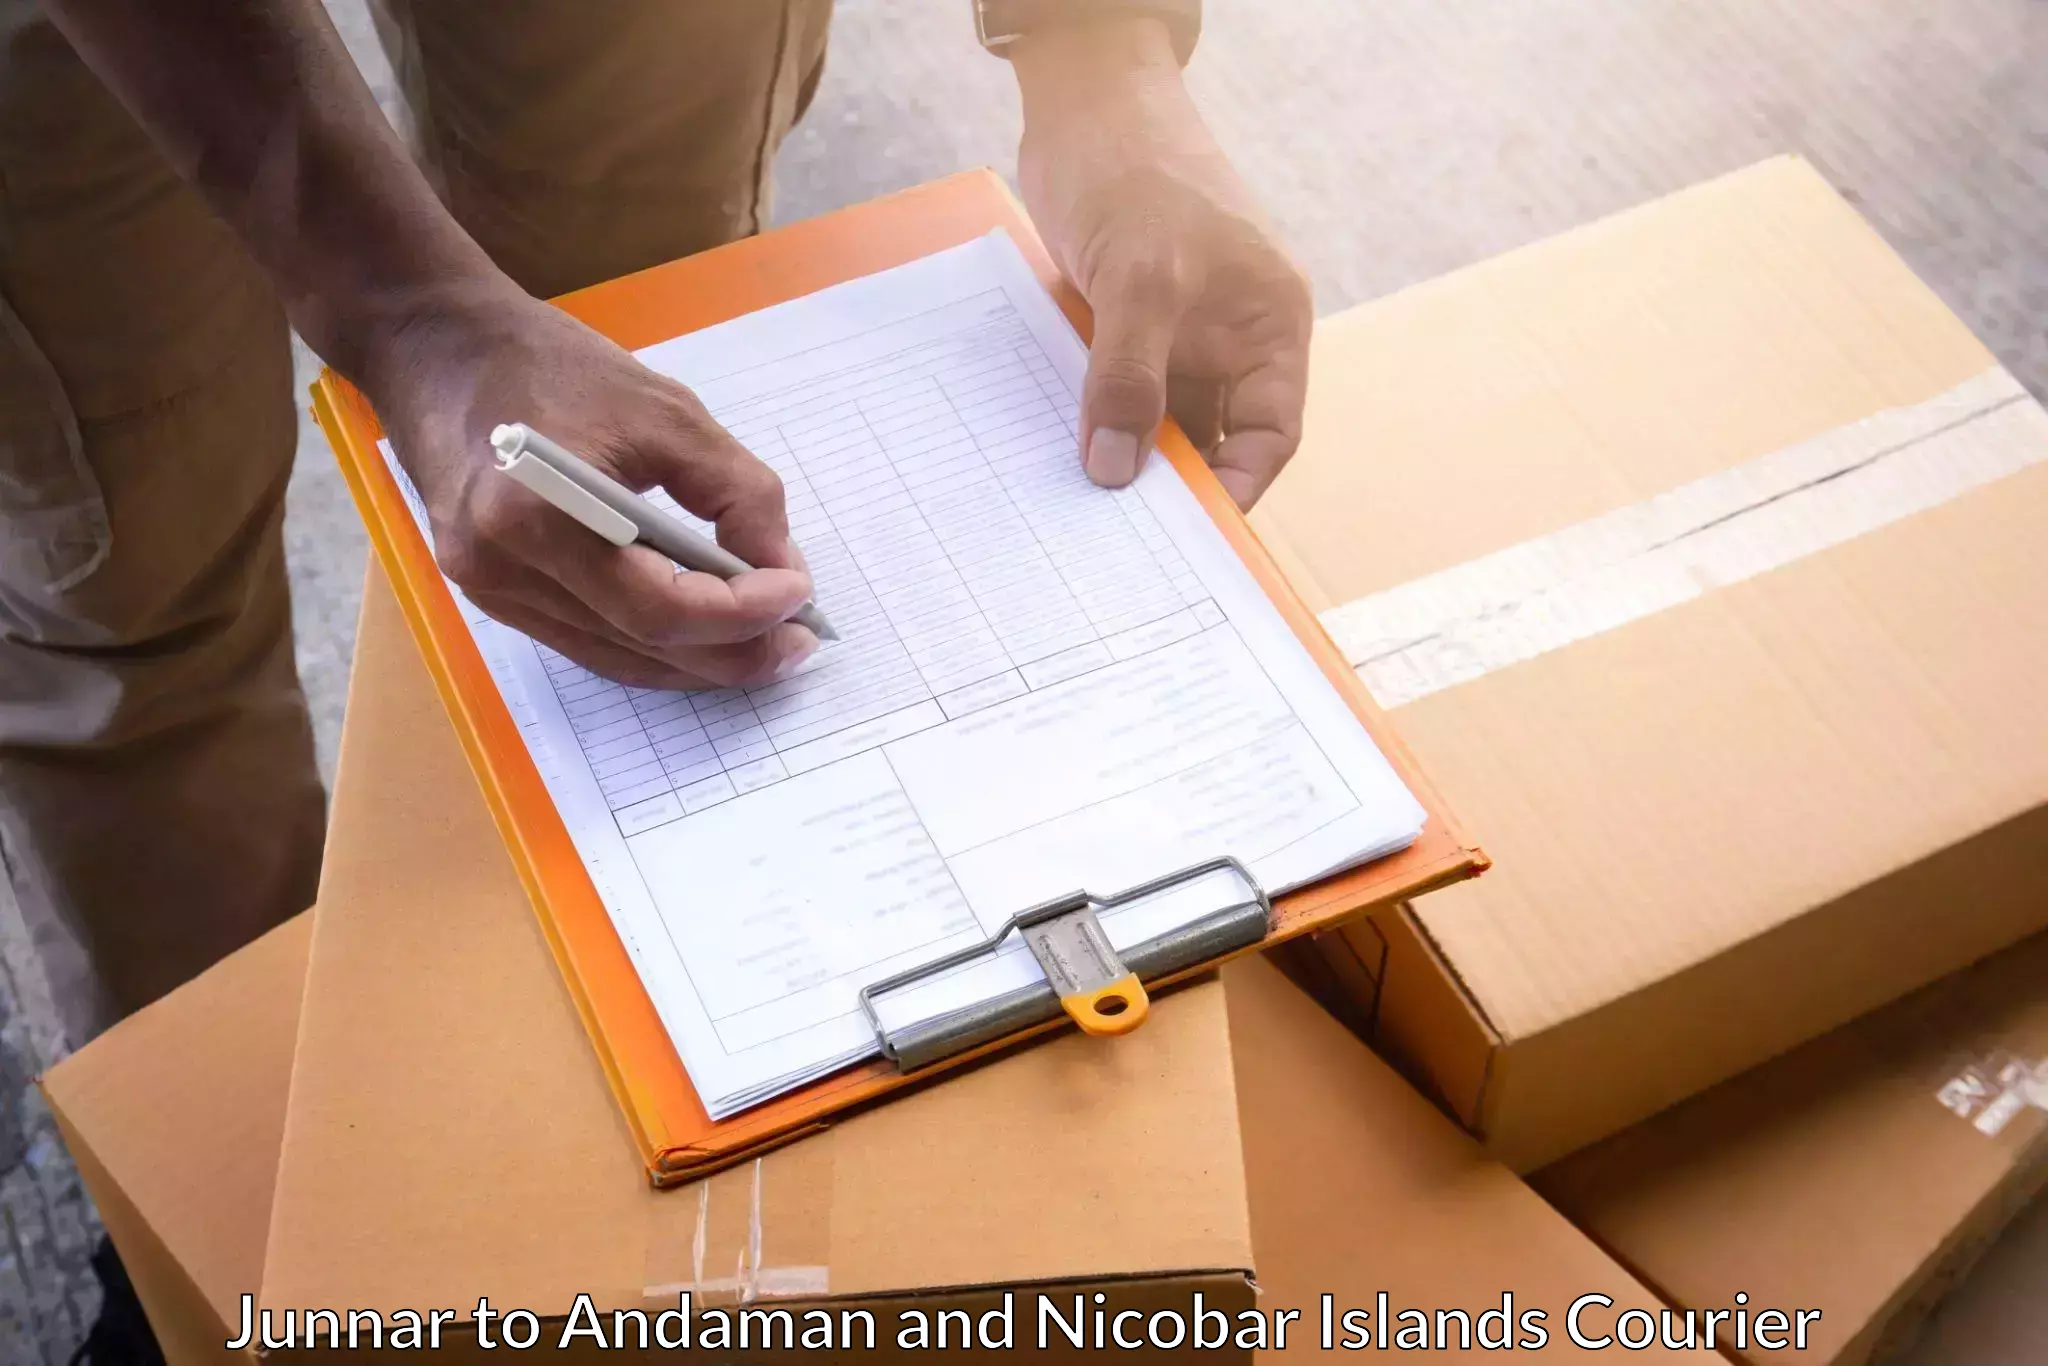 Online package tracking Junnar to Andaman and Nicobar Islands